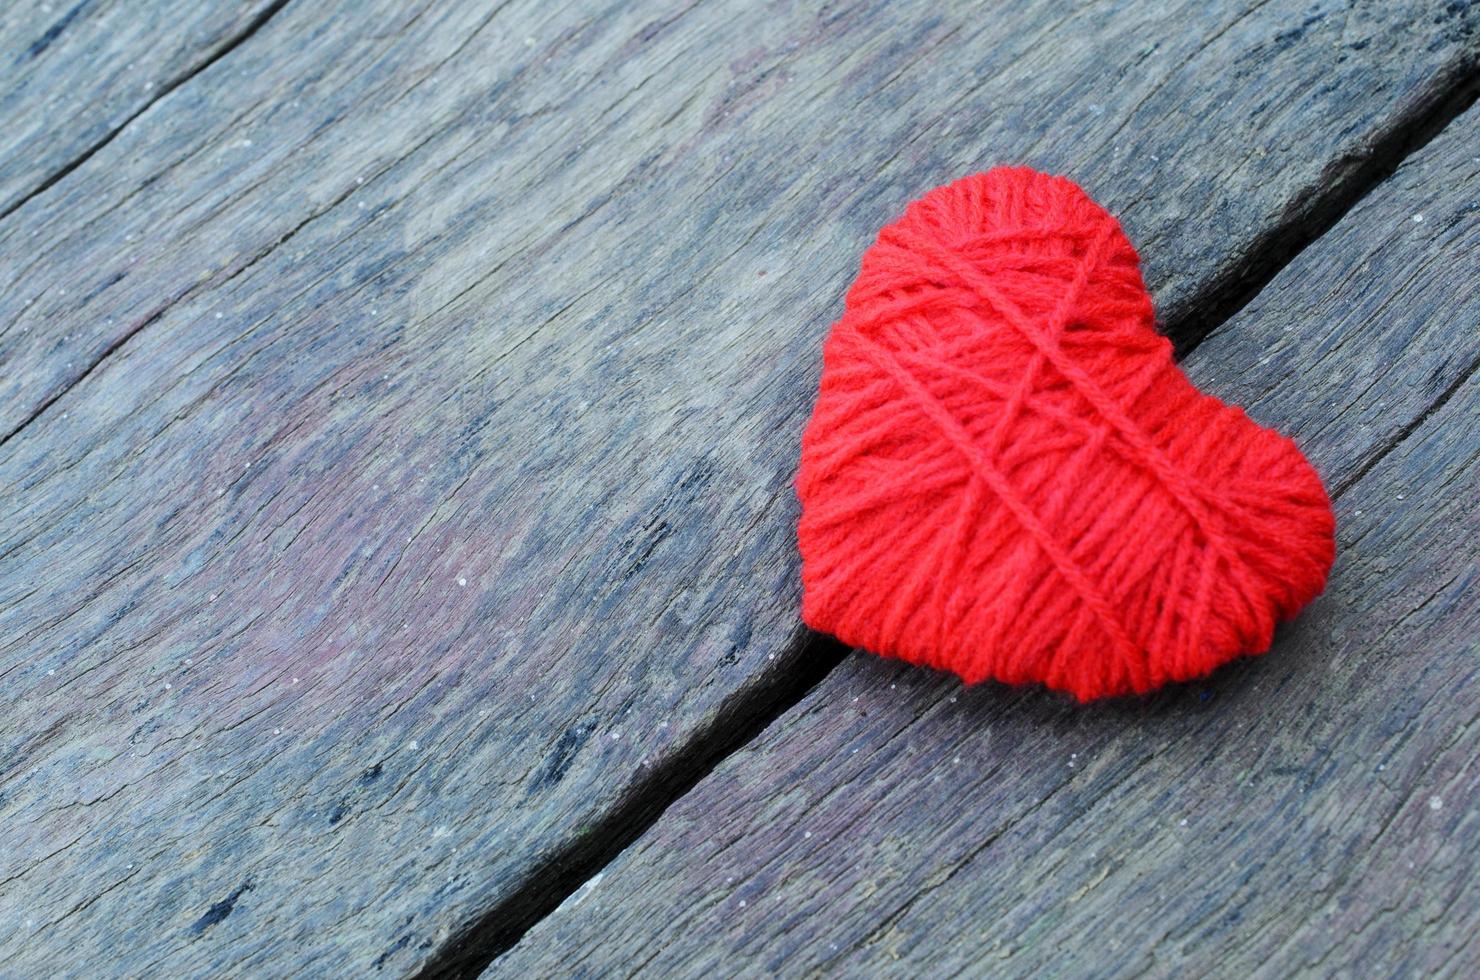 Red heart shape made from thread yarn on old wooden background for Valentines day concept photo